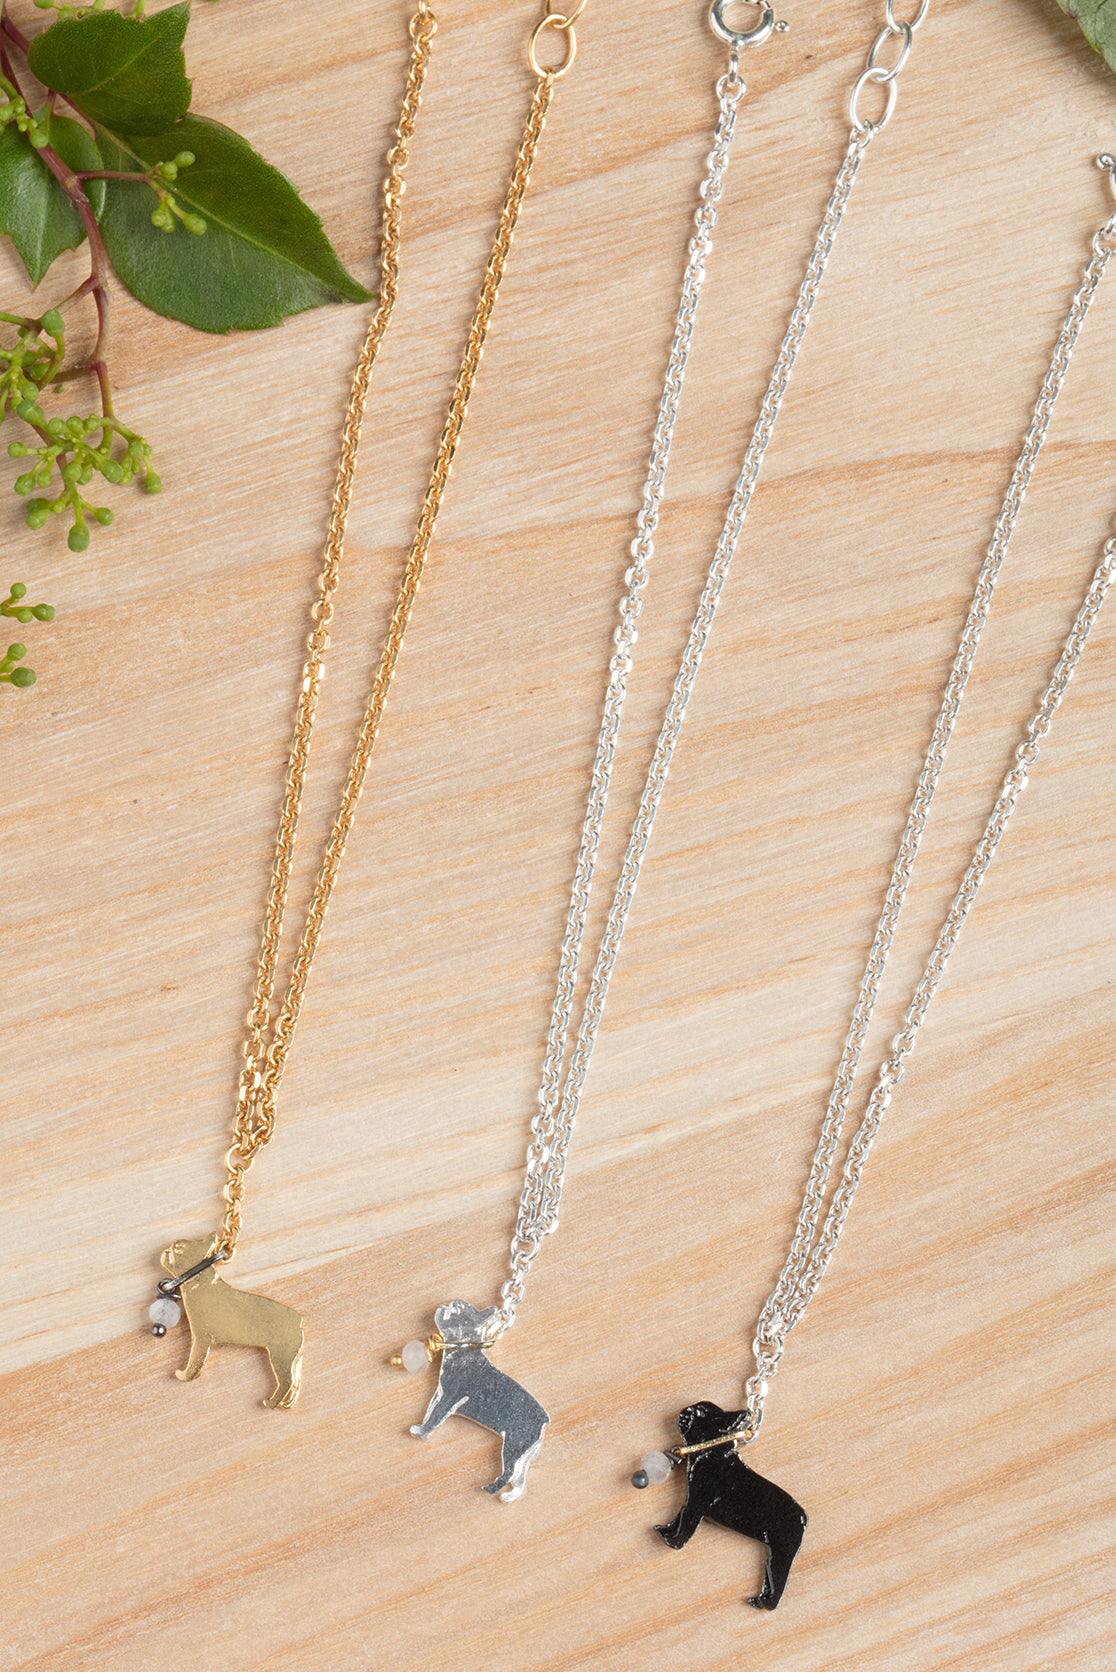 Gold, silver, and black french bulldog necklaces on a wooden countertop